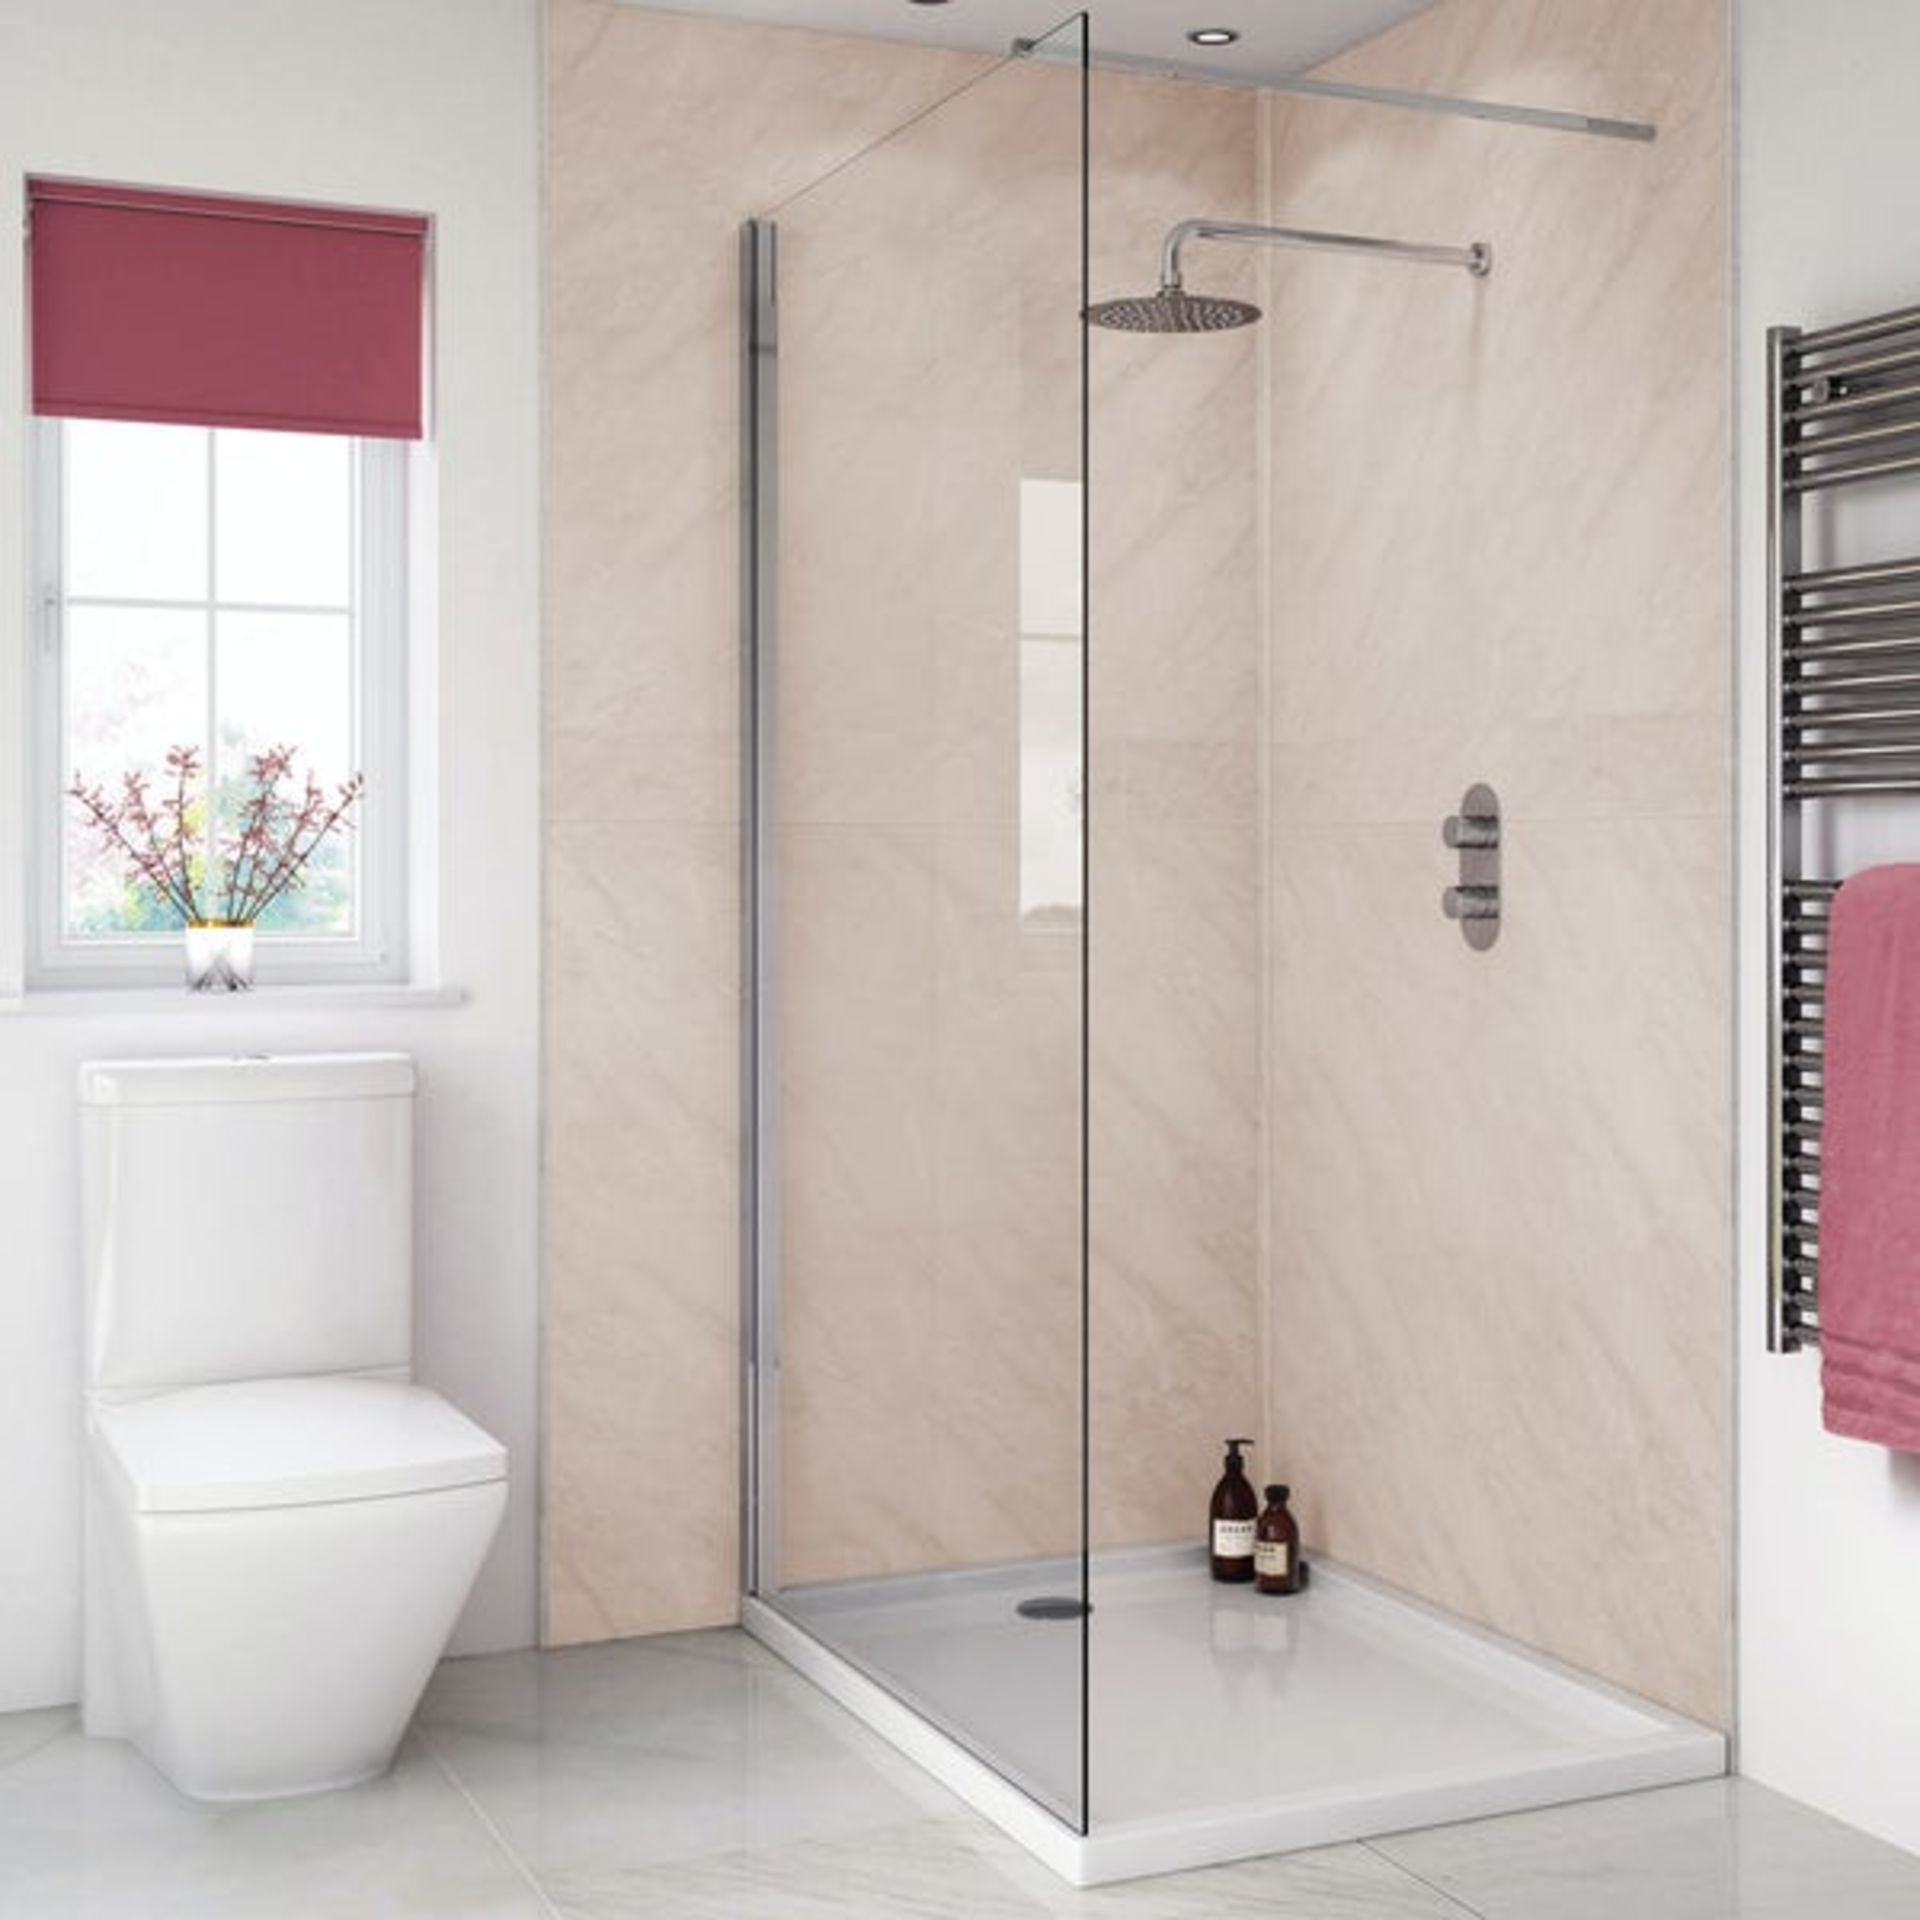 Splash Panel 2 sided shower wall kit in Classic Marble, new and boxed, the kit contains 2 - Image 4 of 5